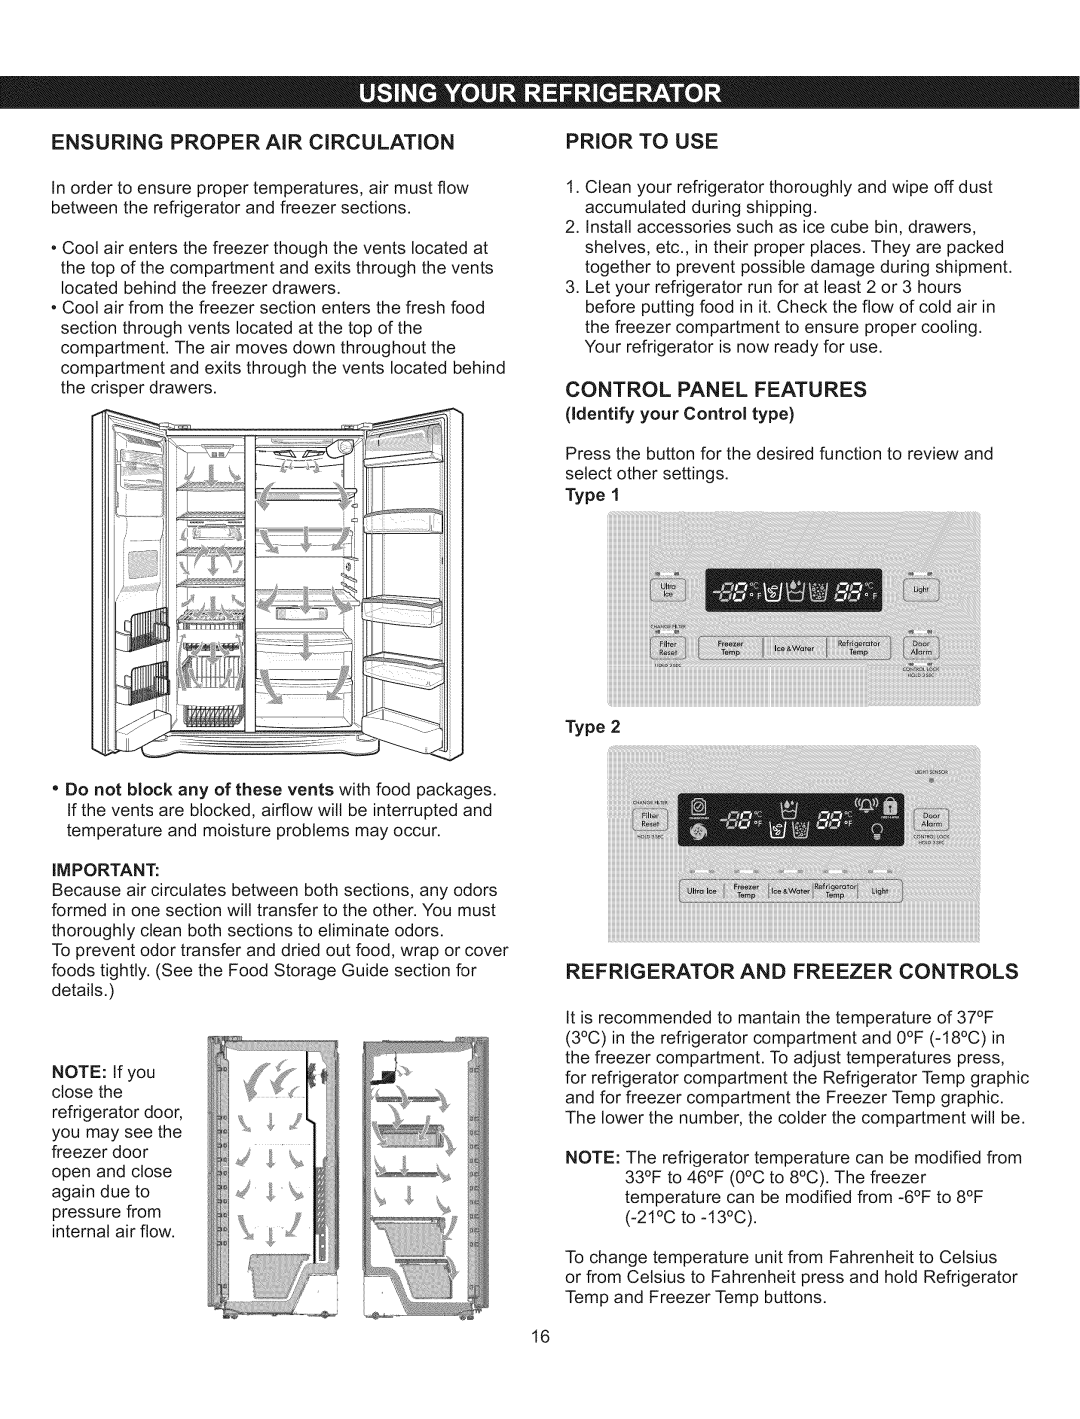 Kenmore 795.5107 ENSURING PROPER AiR CiRCULATiON, Prior To Use, Control Panel Features, Refrigerator And Freezer Controls 